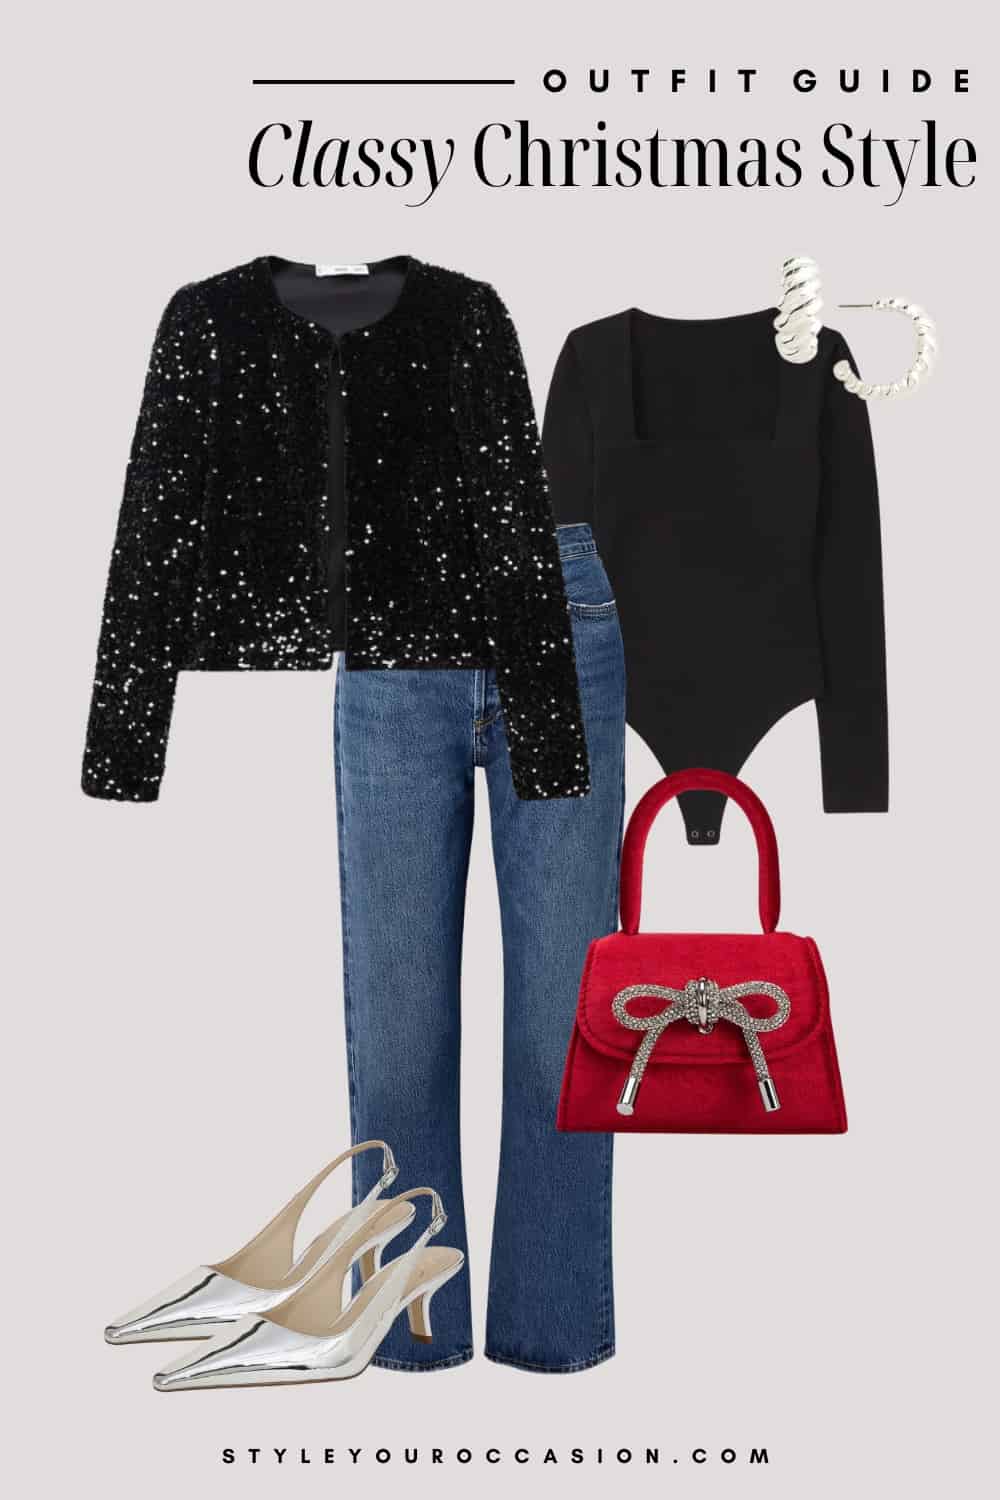 An image board of a Christmas outfit featuring wide-leg blue jeans, a black square neck bodysuit, a sparkly black cardigan, silver slingback heels, a red handbag with silver bow, and silver croissant hoops